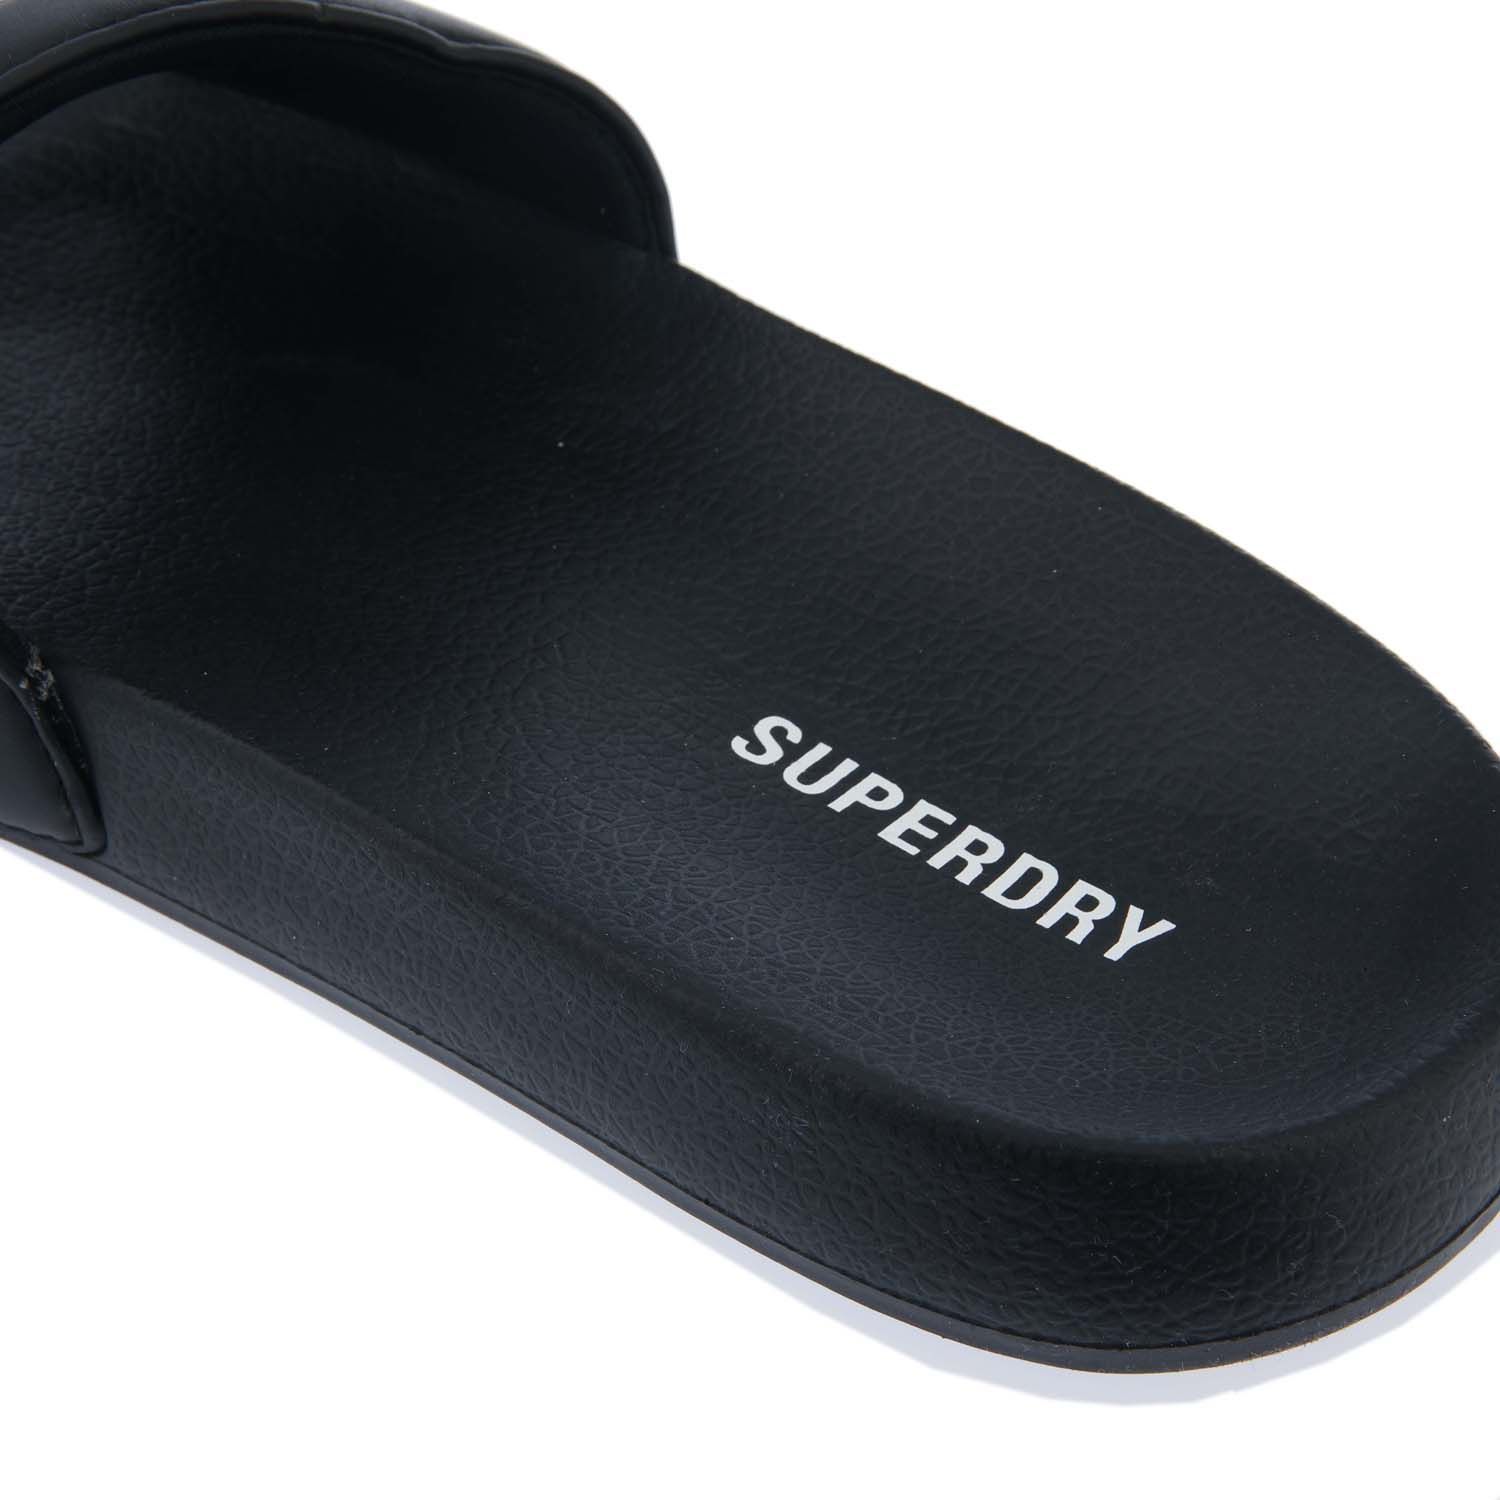 Mens Superdry Code Core Pool Slides in black.- Synthetic upper.- Slip on fastening.- Embossed Superdry logo on side.- Branded footbed.- Moulded sole with a Superdry logo.- Synthetic upper  Textile and synthetic lining.- Ref: MF310199A33B